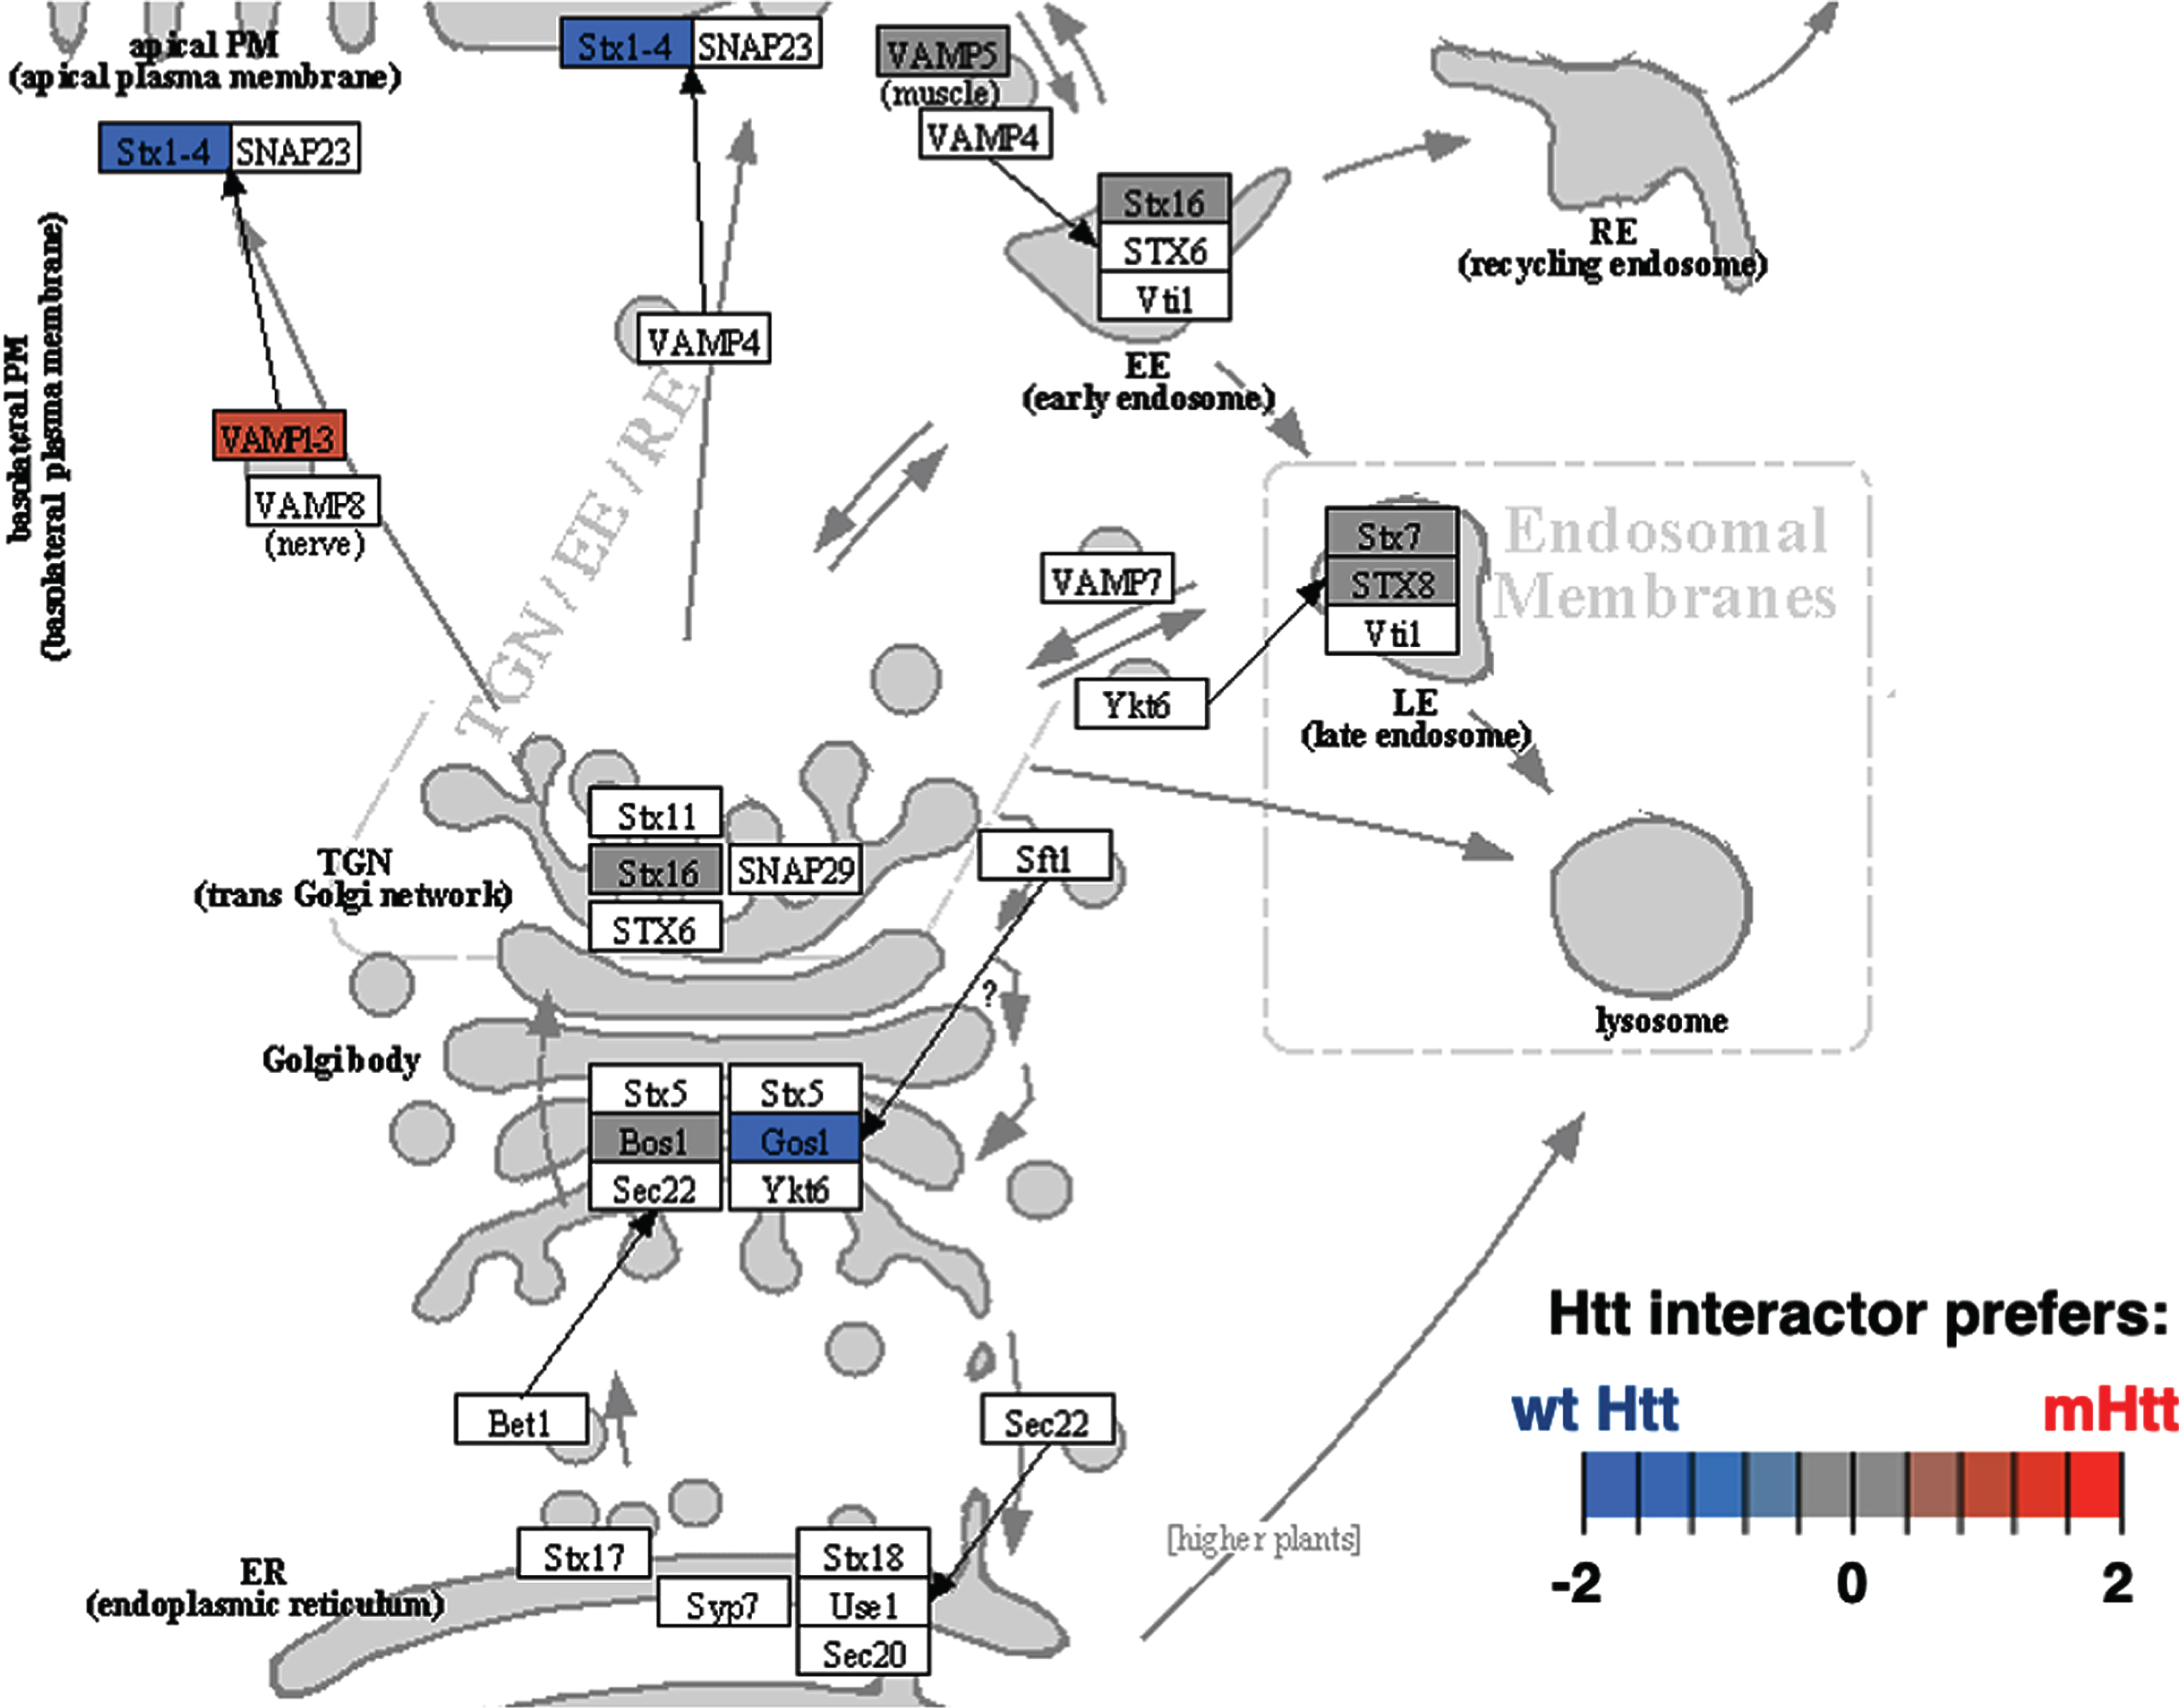 SNARE interactions in vesicular transport KEGG pathway of the membrane trafficking cluster. The SNARE interactions for vesicular transport of the membrane trafficking cluster was highly significant with respect to interactions with Htt (Supplementary Table 2). Preferred interactions of mutant Htt (mHtt) or wt Htt with pathway components are illustrated by red to blue color key.